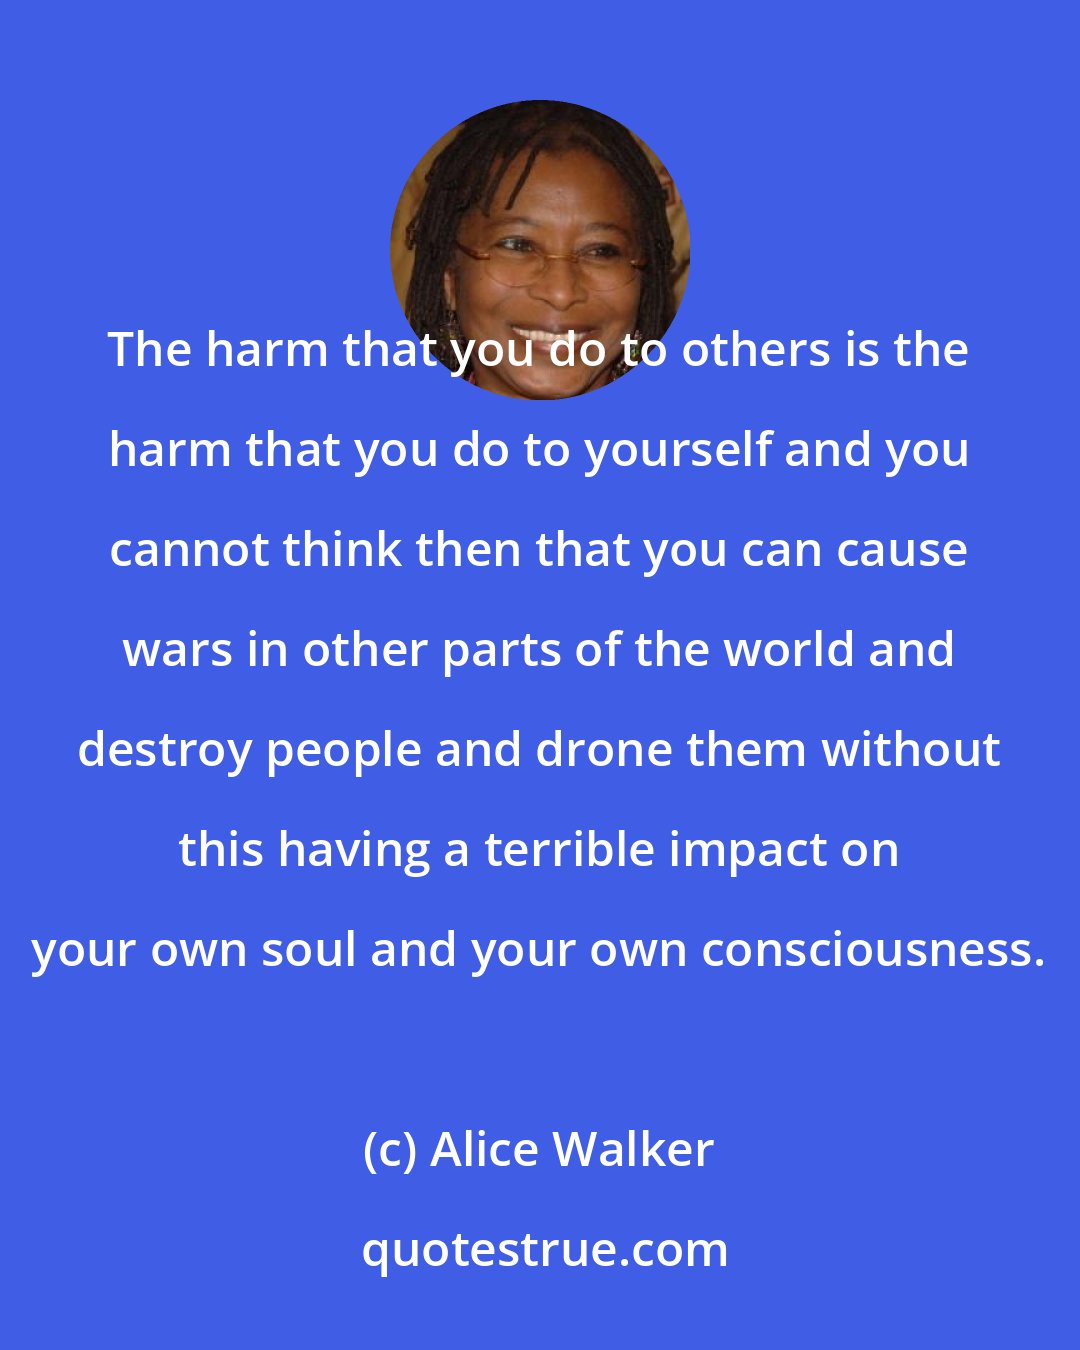 Alice Walker: The harm that you do to others is the harm that you do to yourself and you cannot think then that you can cause wars in other parts of the world and destroy people and drone them without this having a terrible impact on your own soul and your own consciousness.